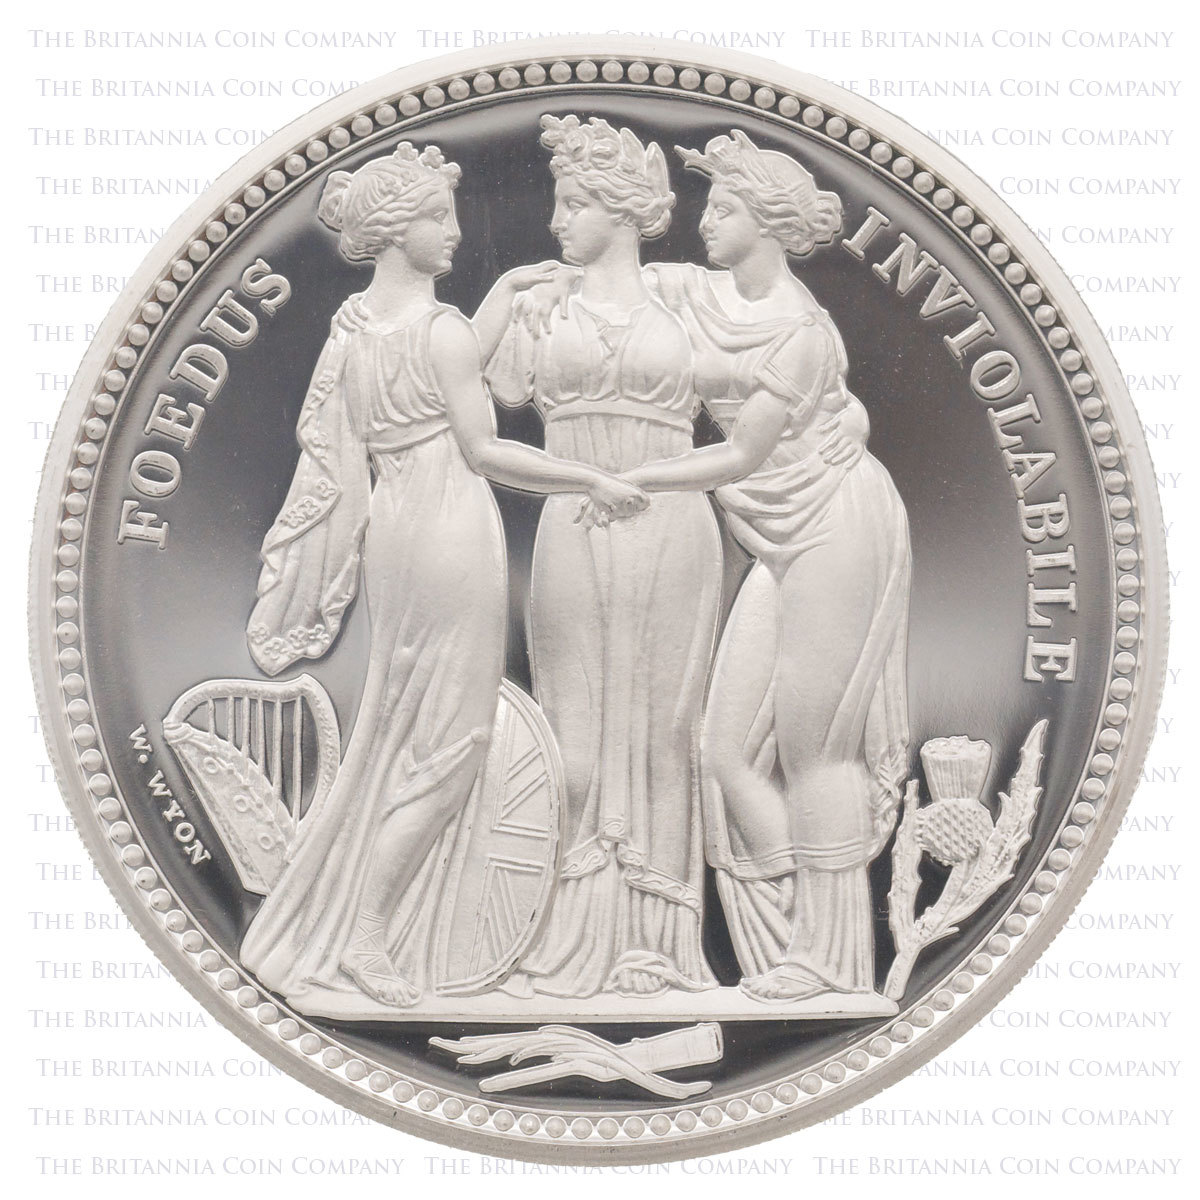 2020 Three Graces Silver Proof 10 Ounce PF 70 UC First Release Reverse